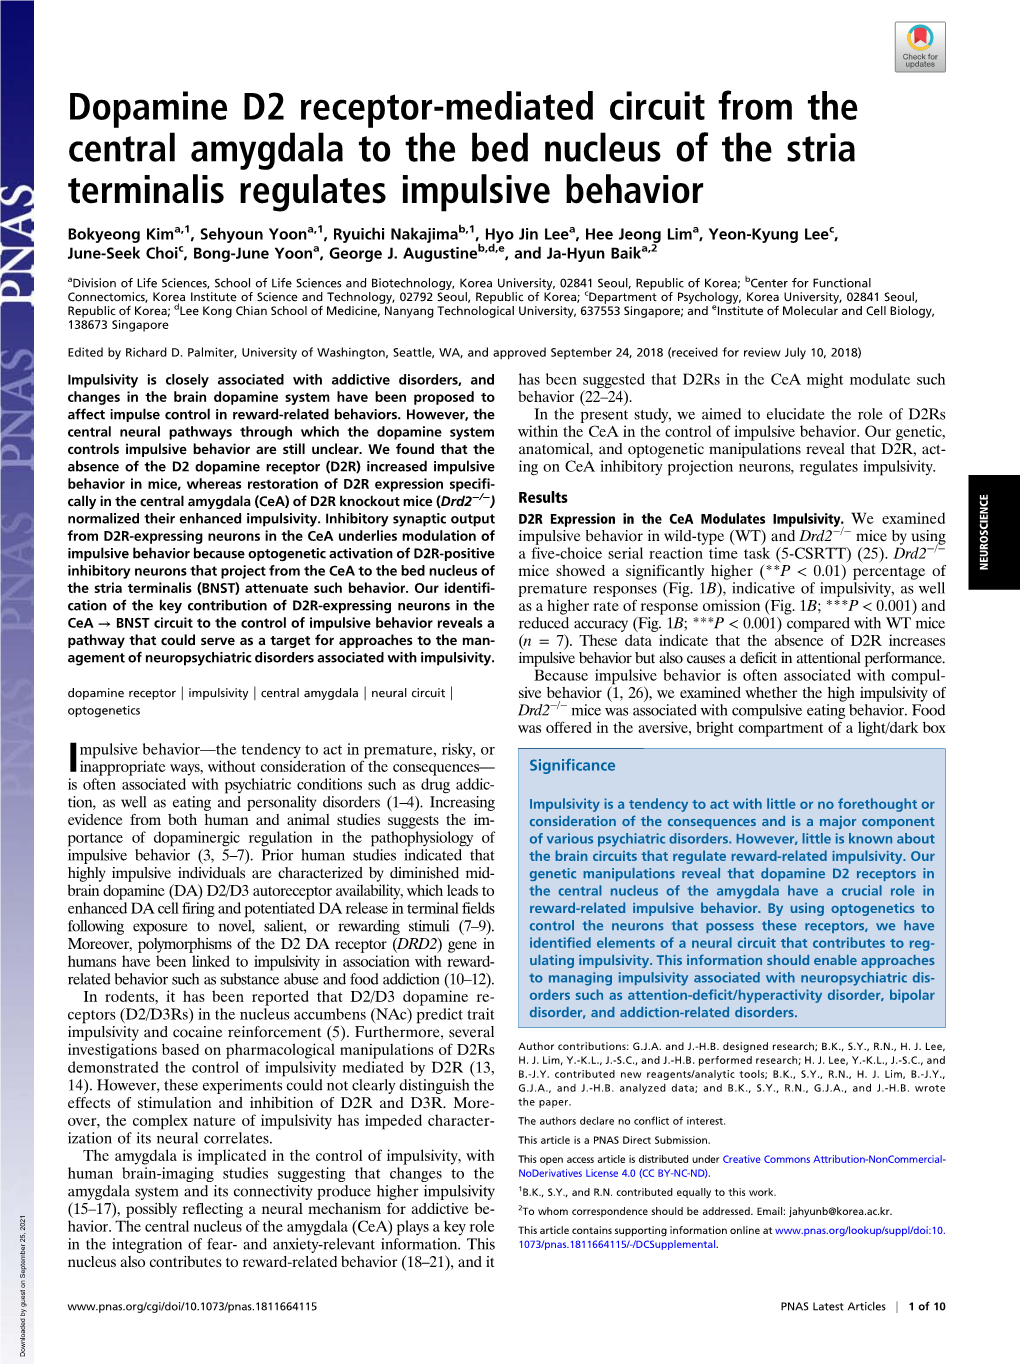 Dopamine D2 Receptor-Mediated Circuit from the Central Amygdala to the Bed Nucleus of the Stria Terminalis Regulates Impulsive Behavior